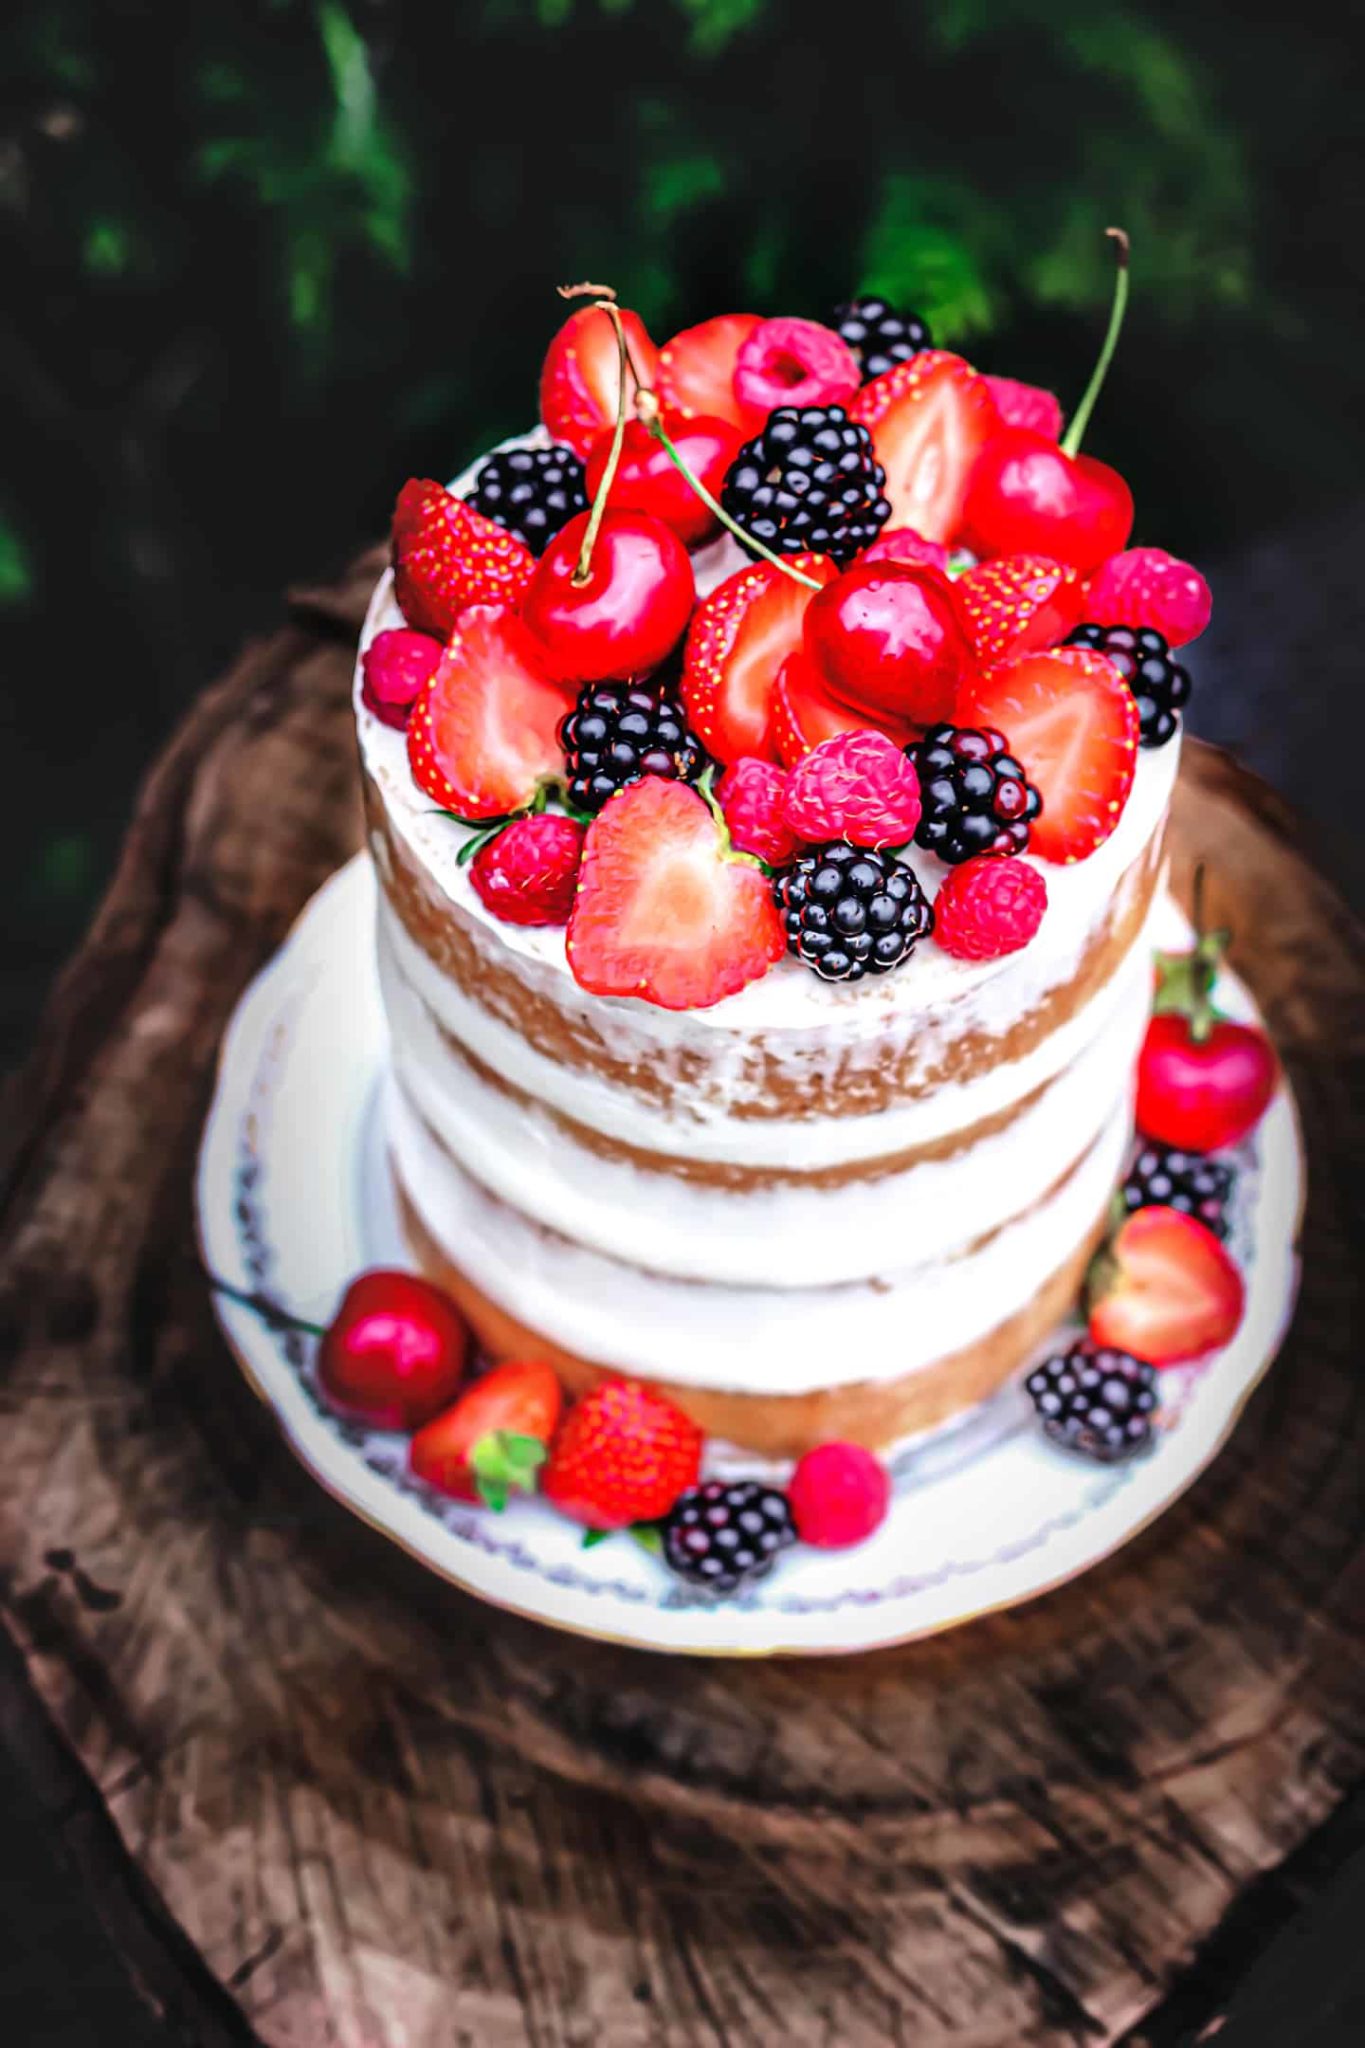 Comment Faire Un Naked Cake Aux Fruits Rouges Sweetly Cakes